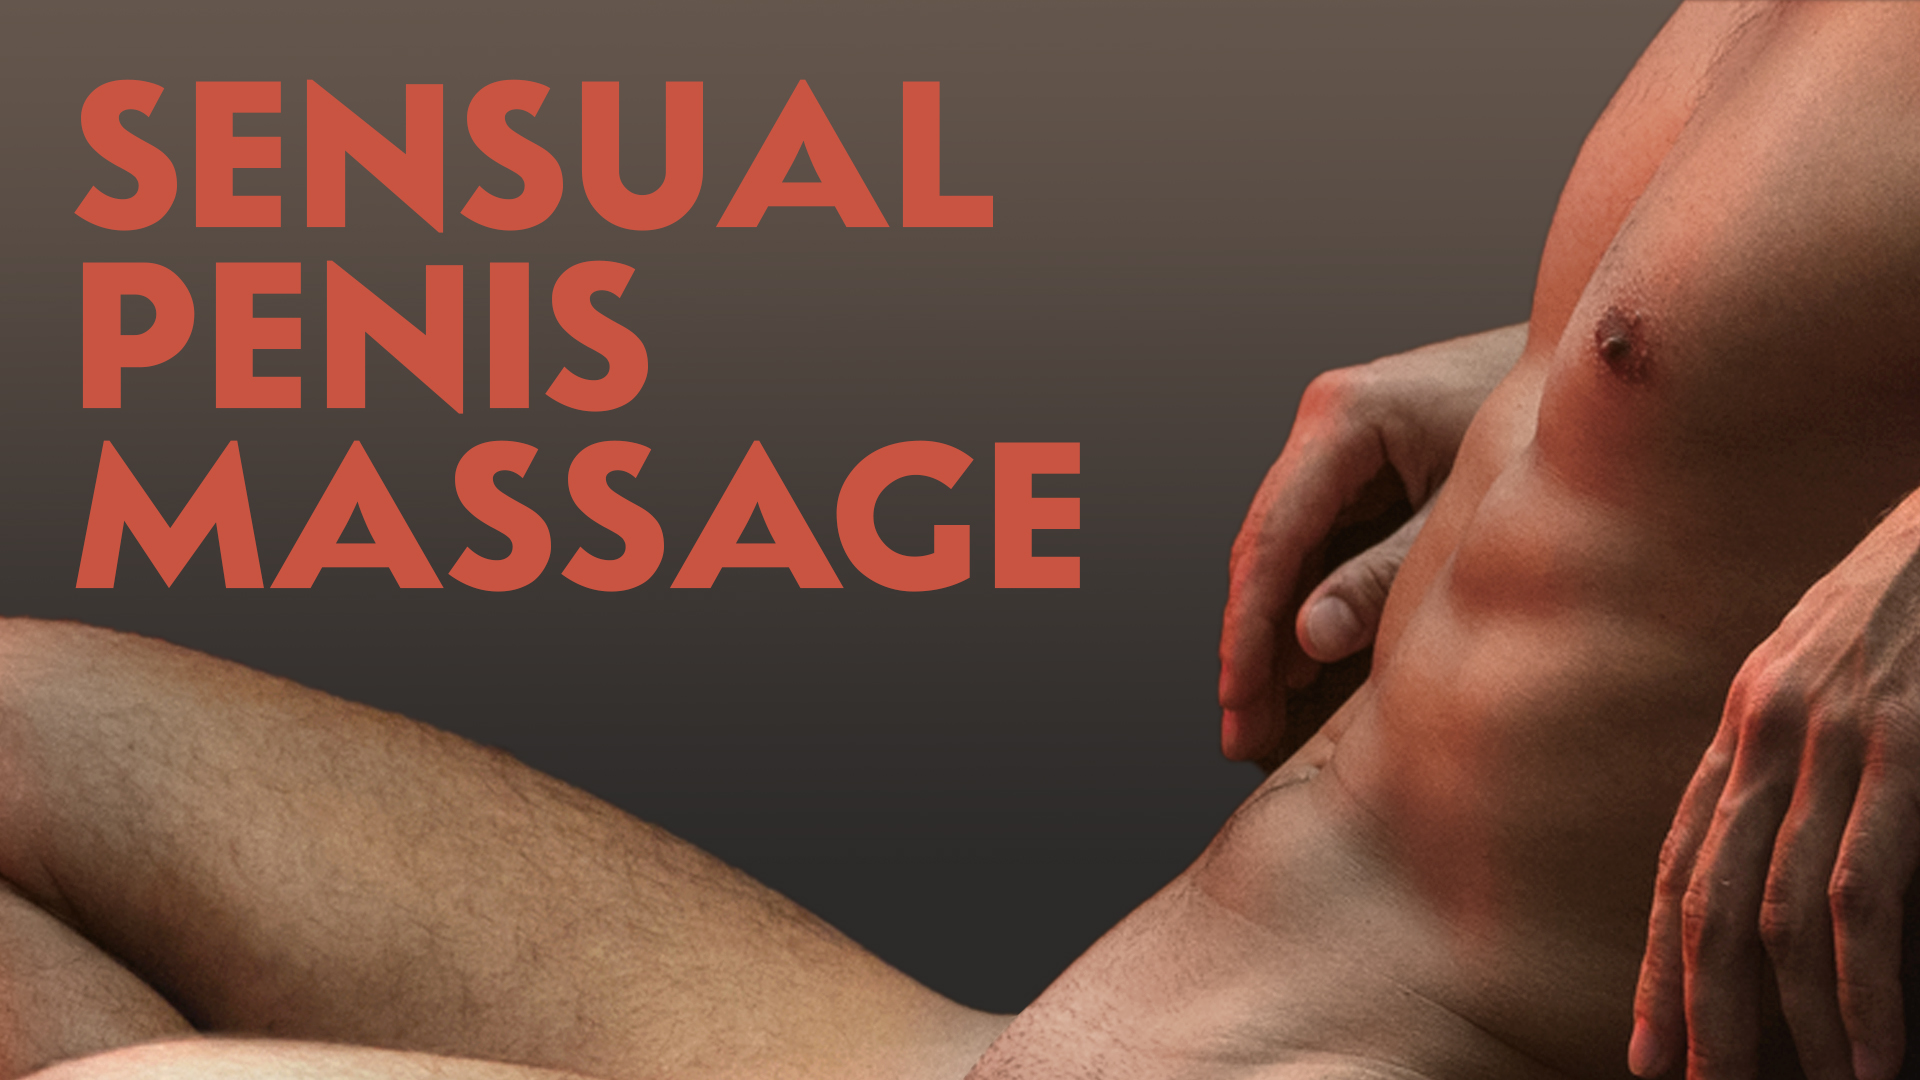 carlos curet recommends where to get a penis massage pic